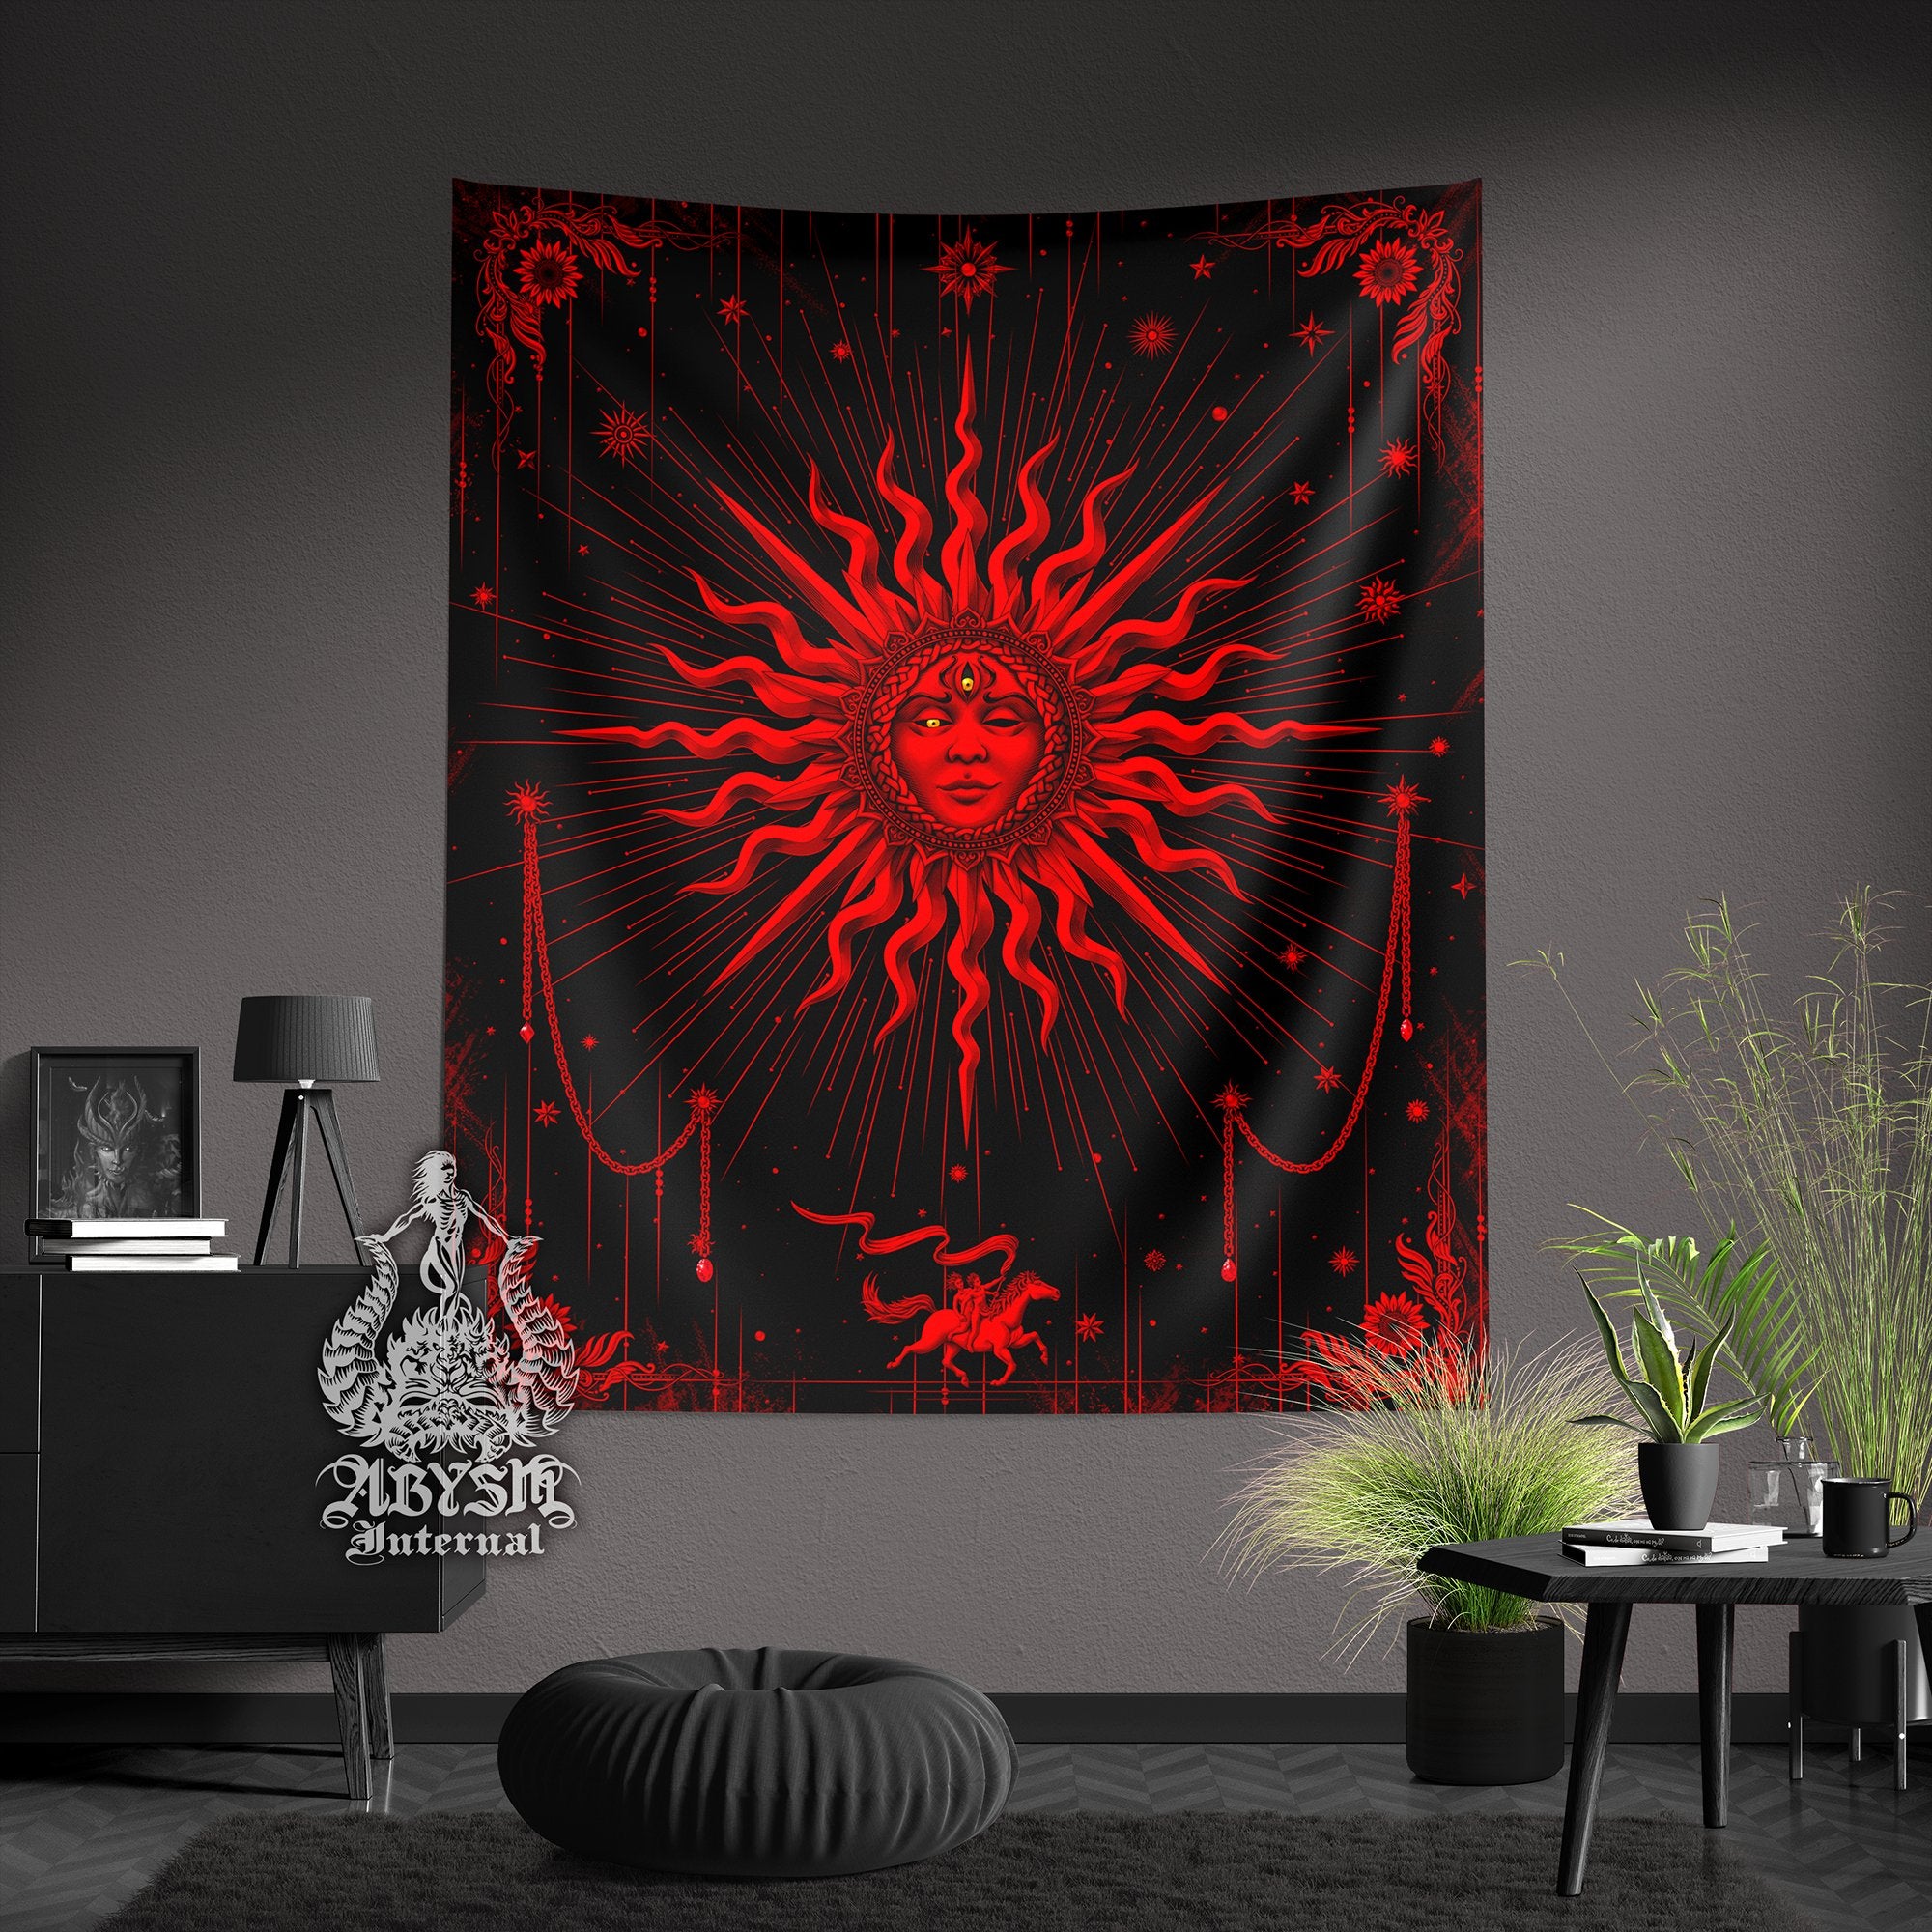 Gothic Sun Tapestry, Tarot Card Arcana Wall Hanging, Witchy Home, Magic and Esoteric Art, Goth Witch's Room Decor, Vertical Print - Black Red - Abysm Internal